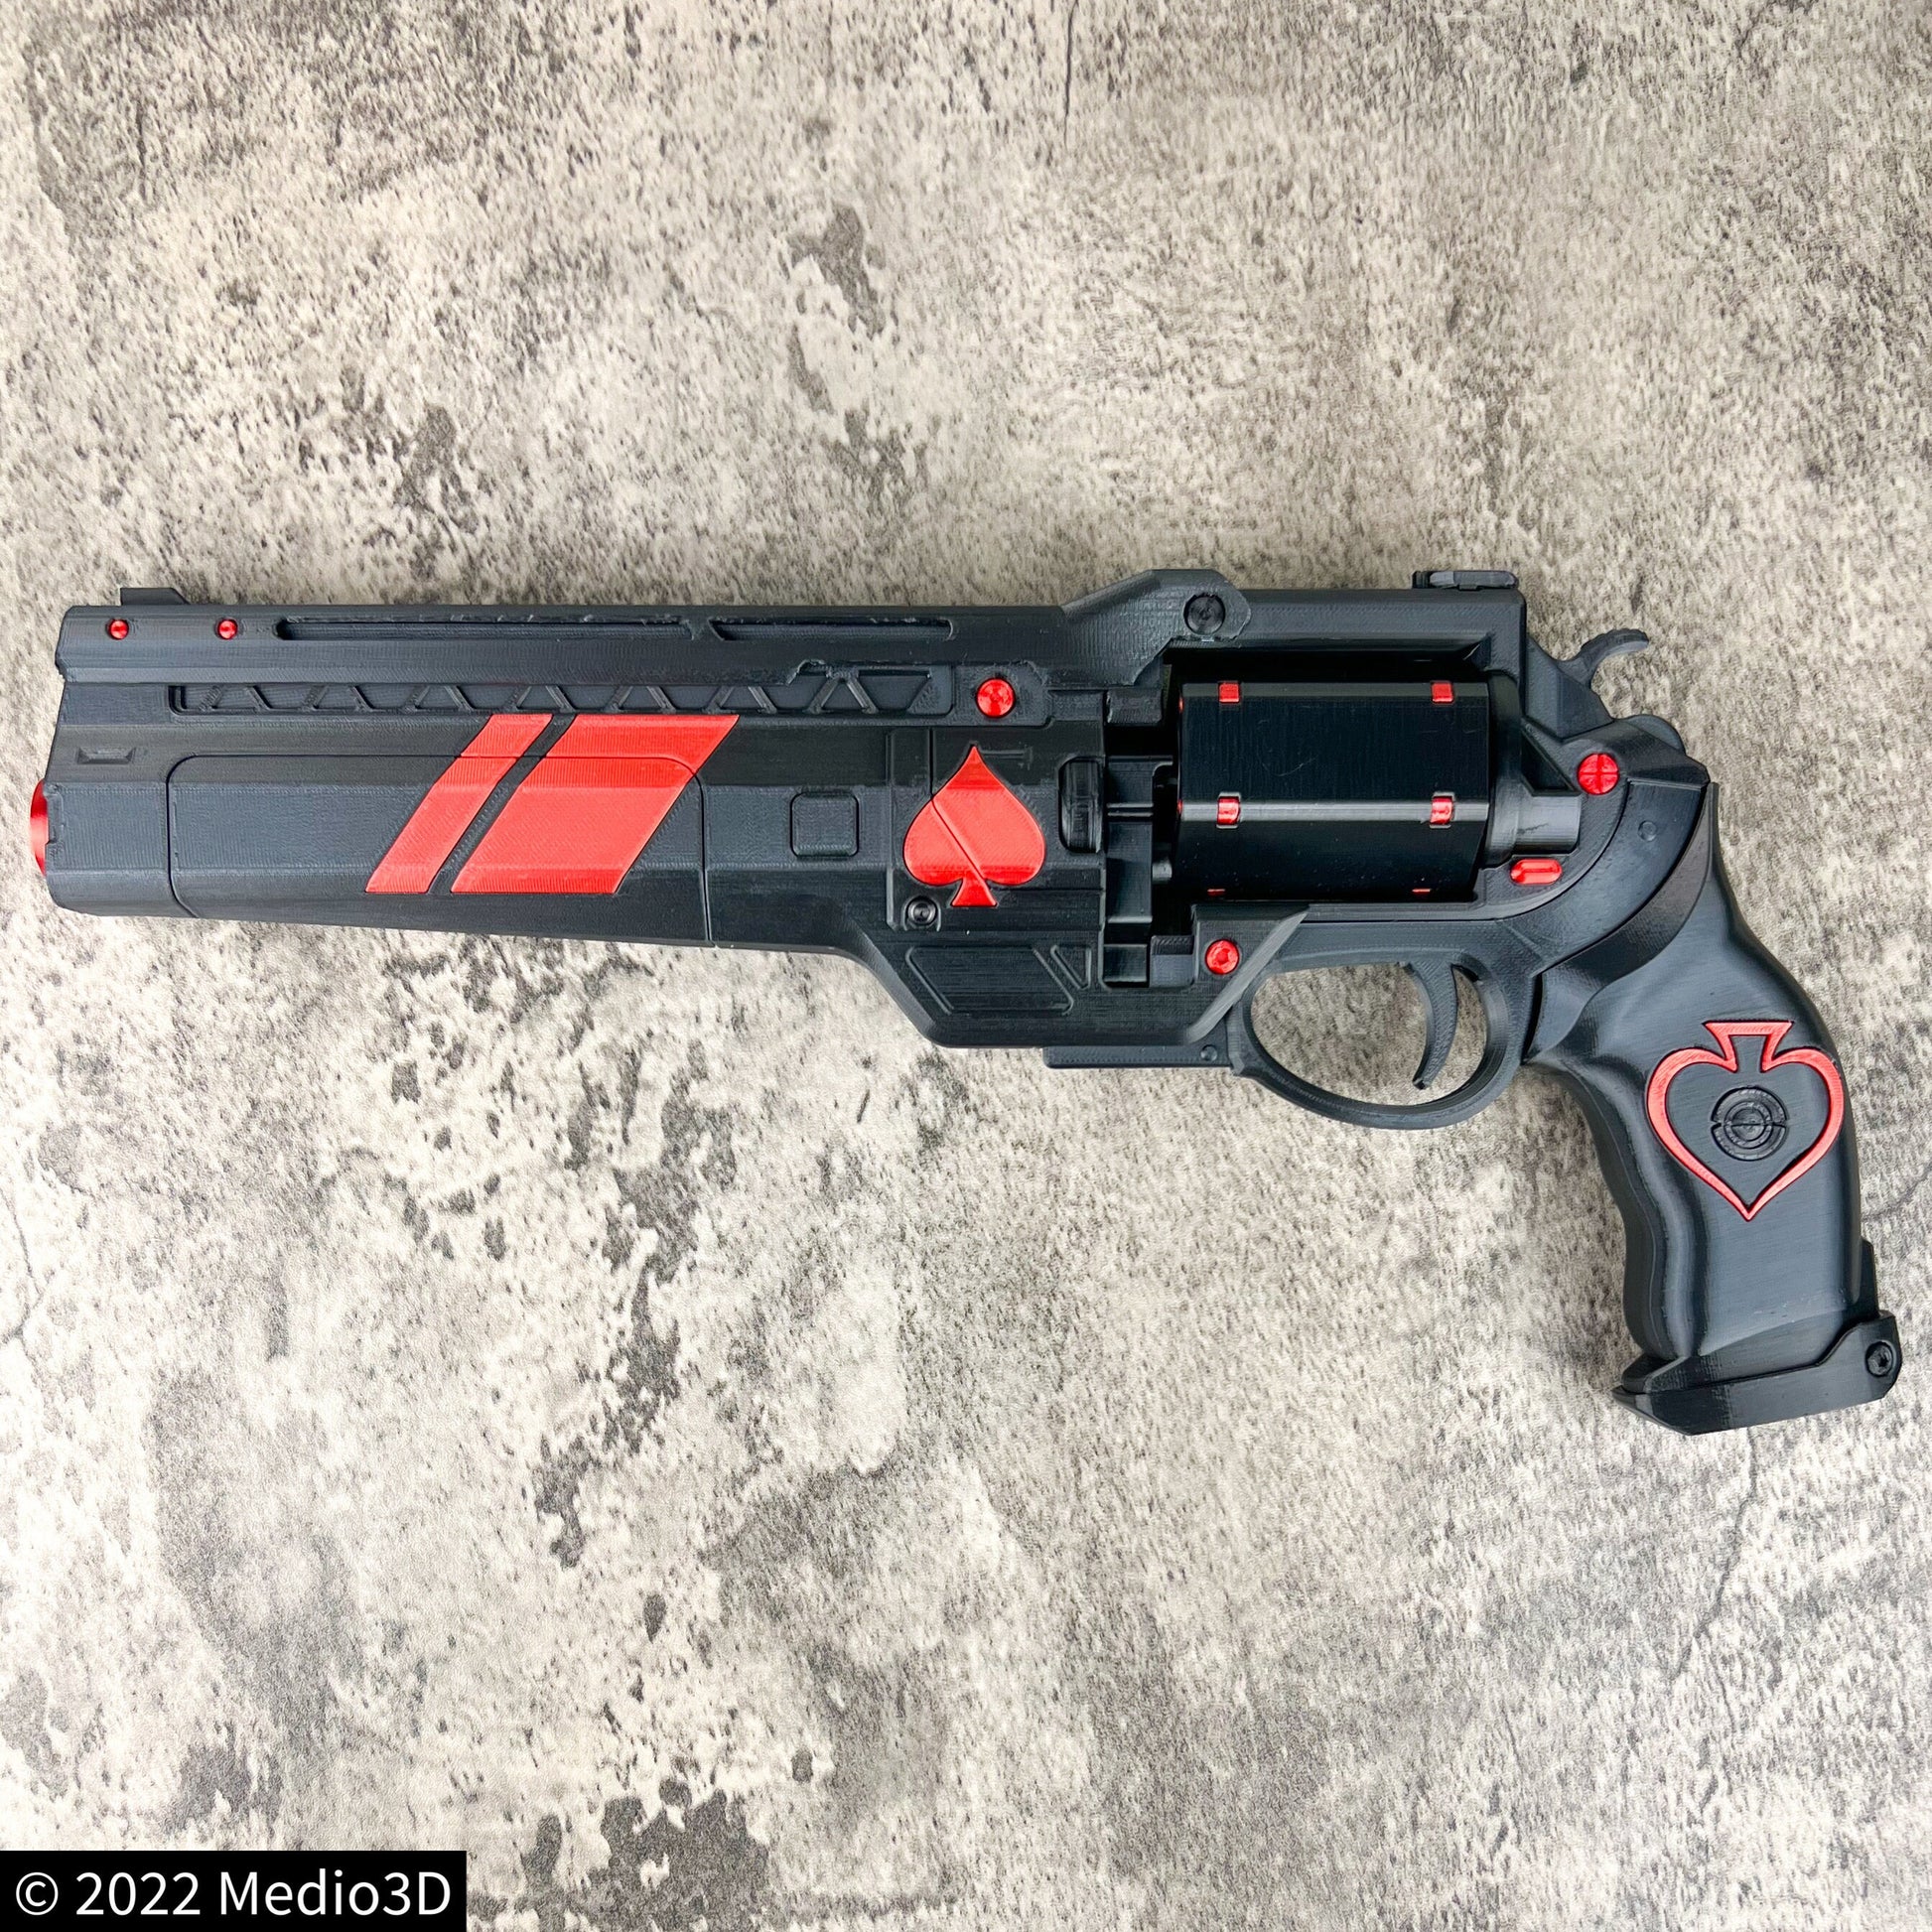 Ace of Spades Hand Cannon Props Cosplay, Larp Props, Post Apocalyptic Larp Weapon, Cyberpunk Prop